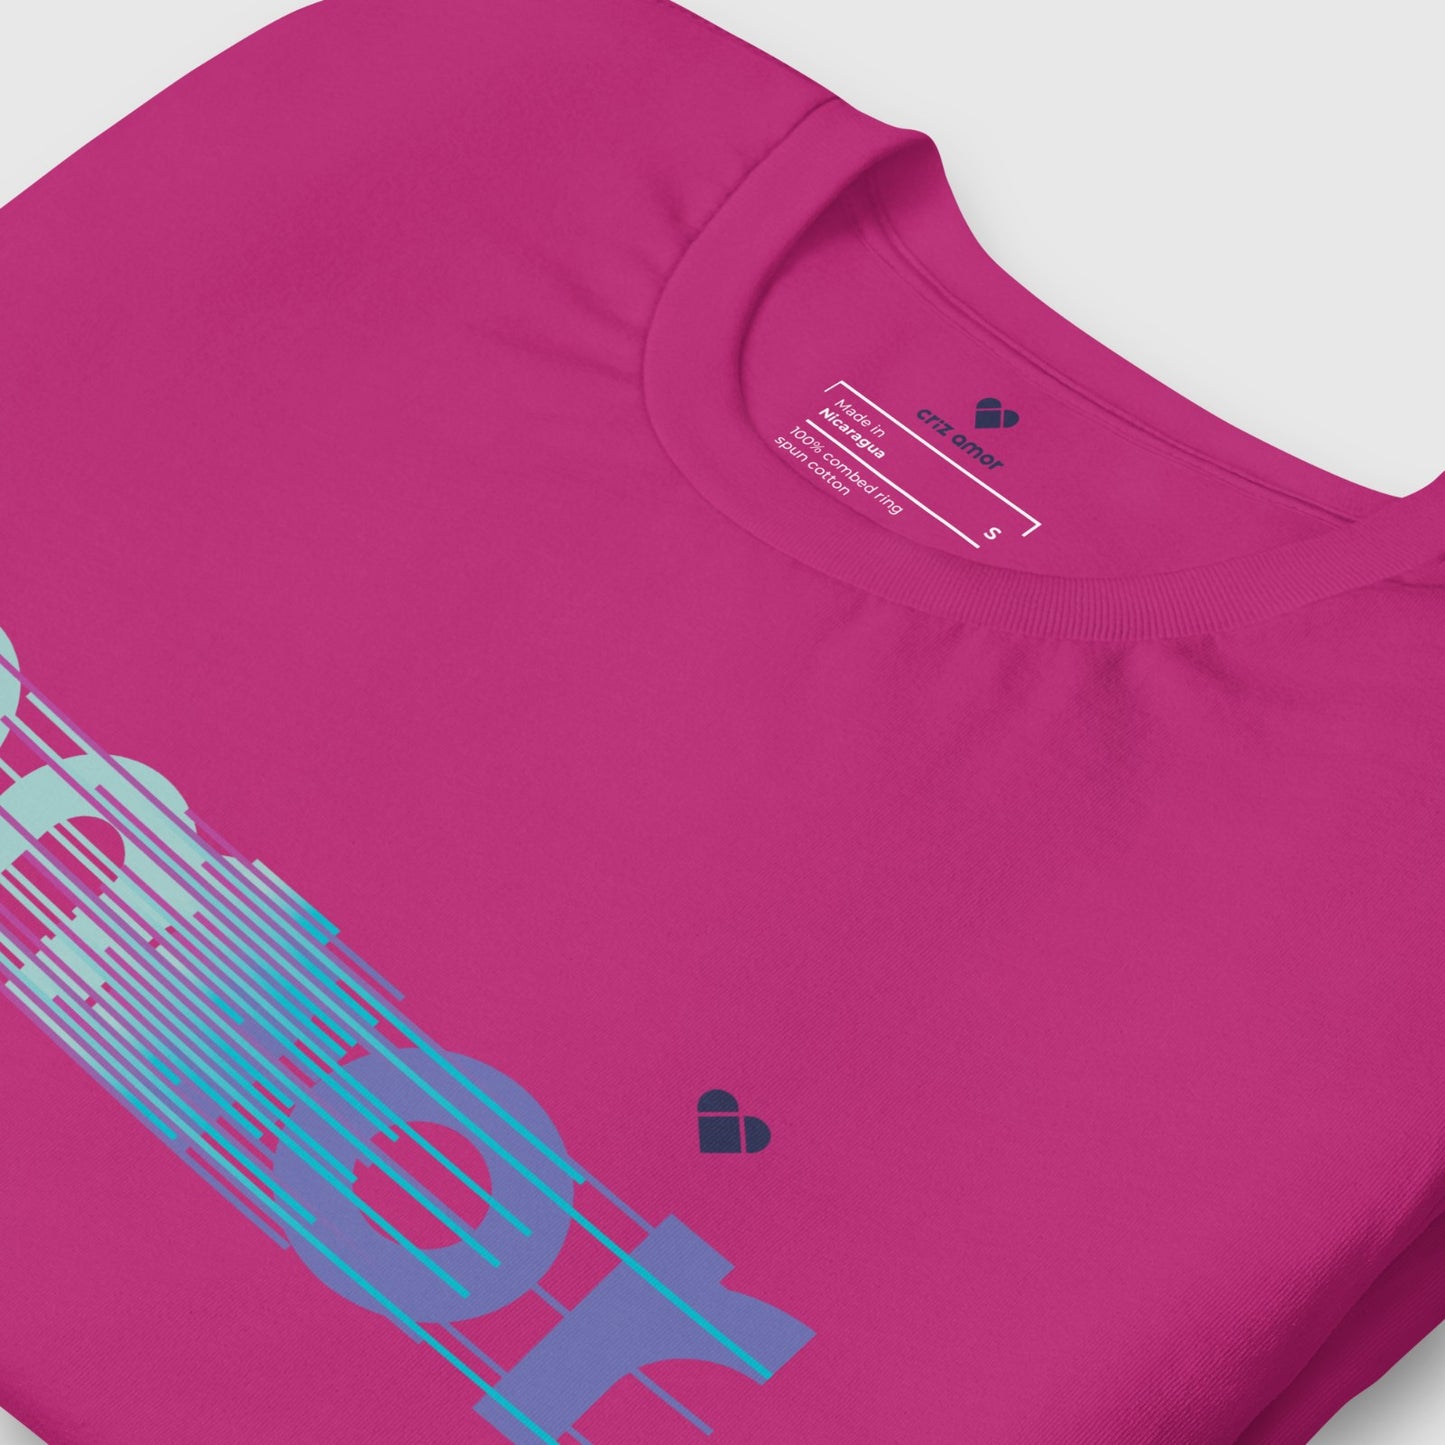 Amor Dual Collection Tee - Vibrant Fucsia Pink